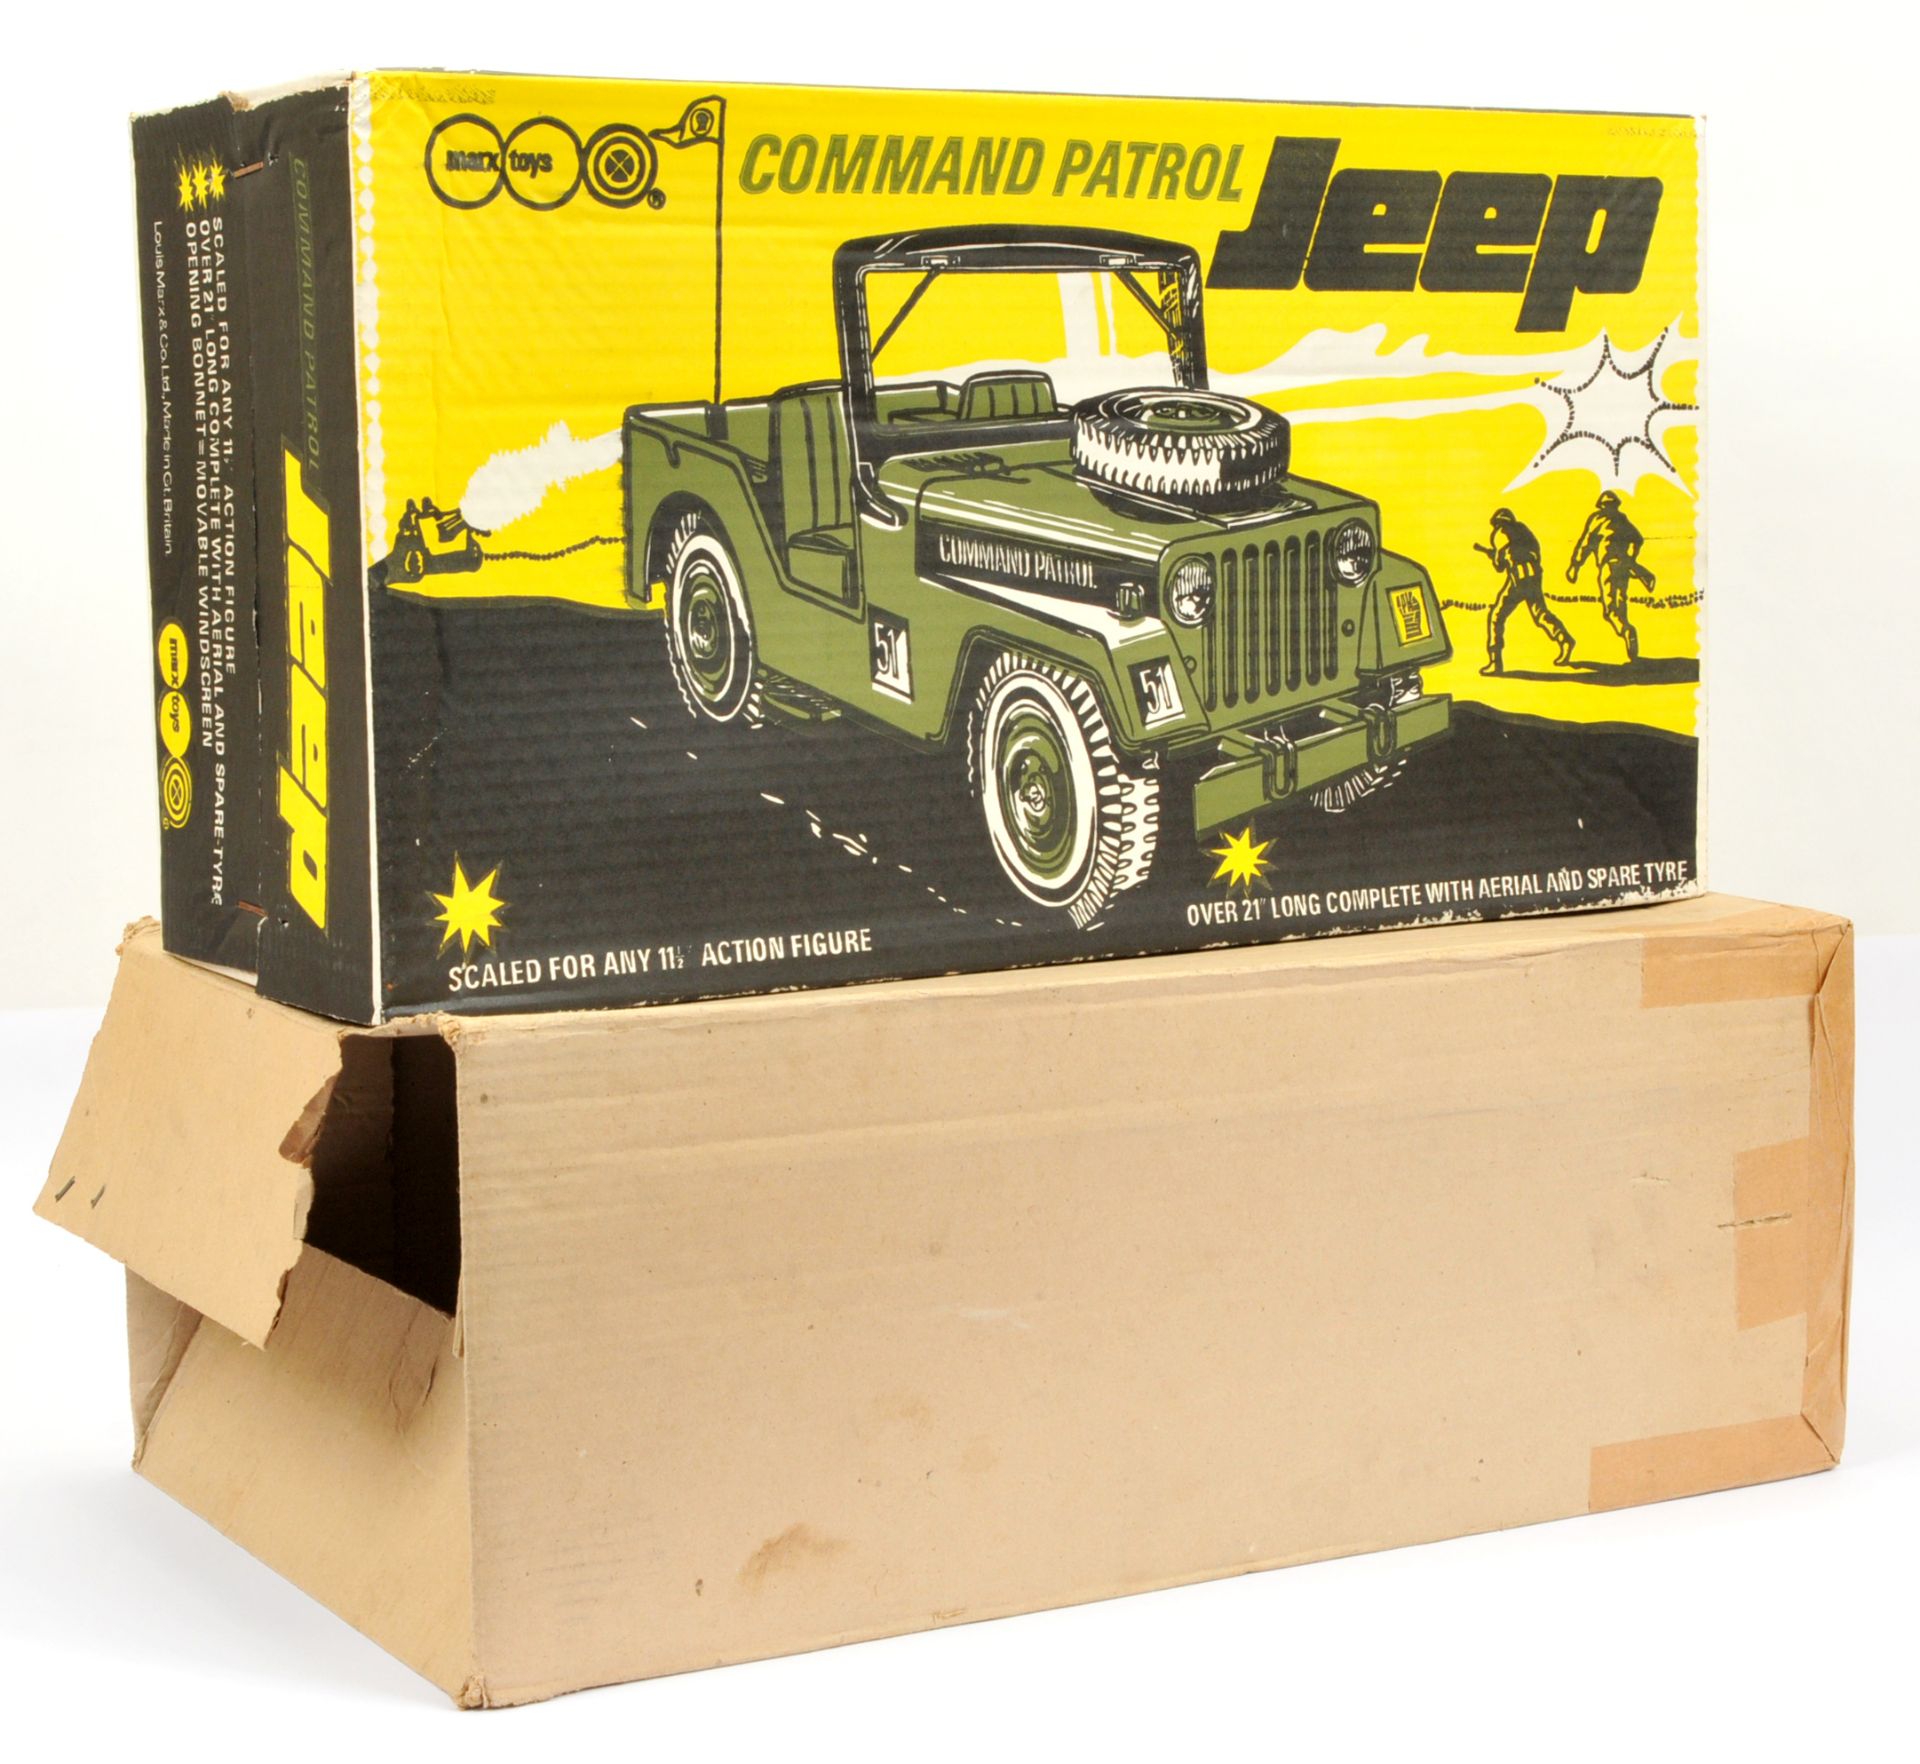 Marx Toys Command Patrol Jeep, scaled for any 11 1/2" Action figure, over 21" long, complete with... - Image 2 of 3